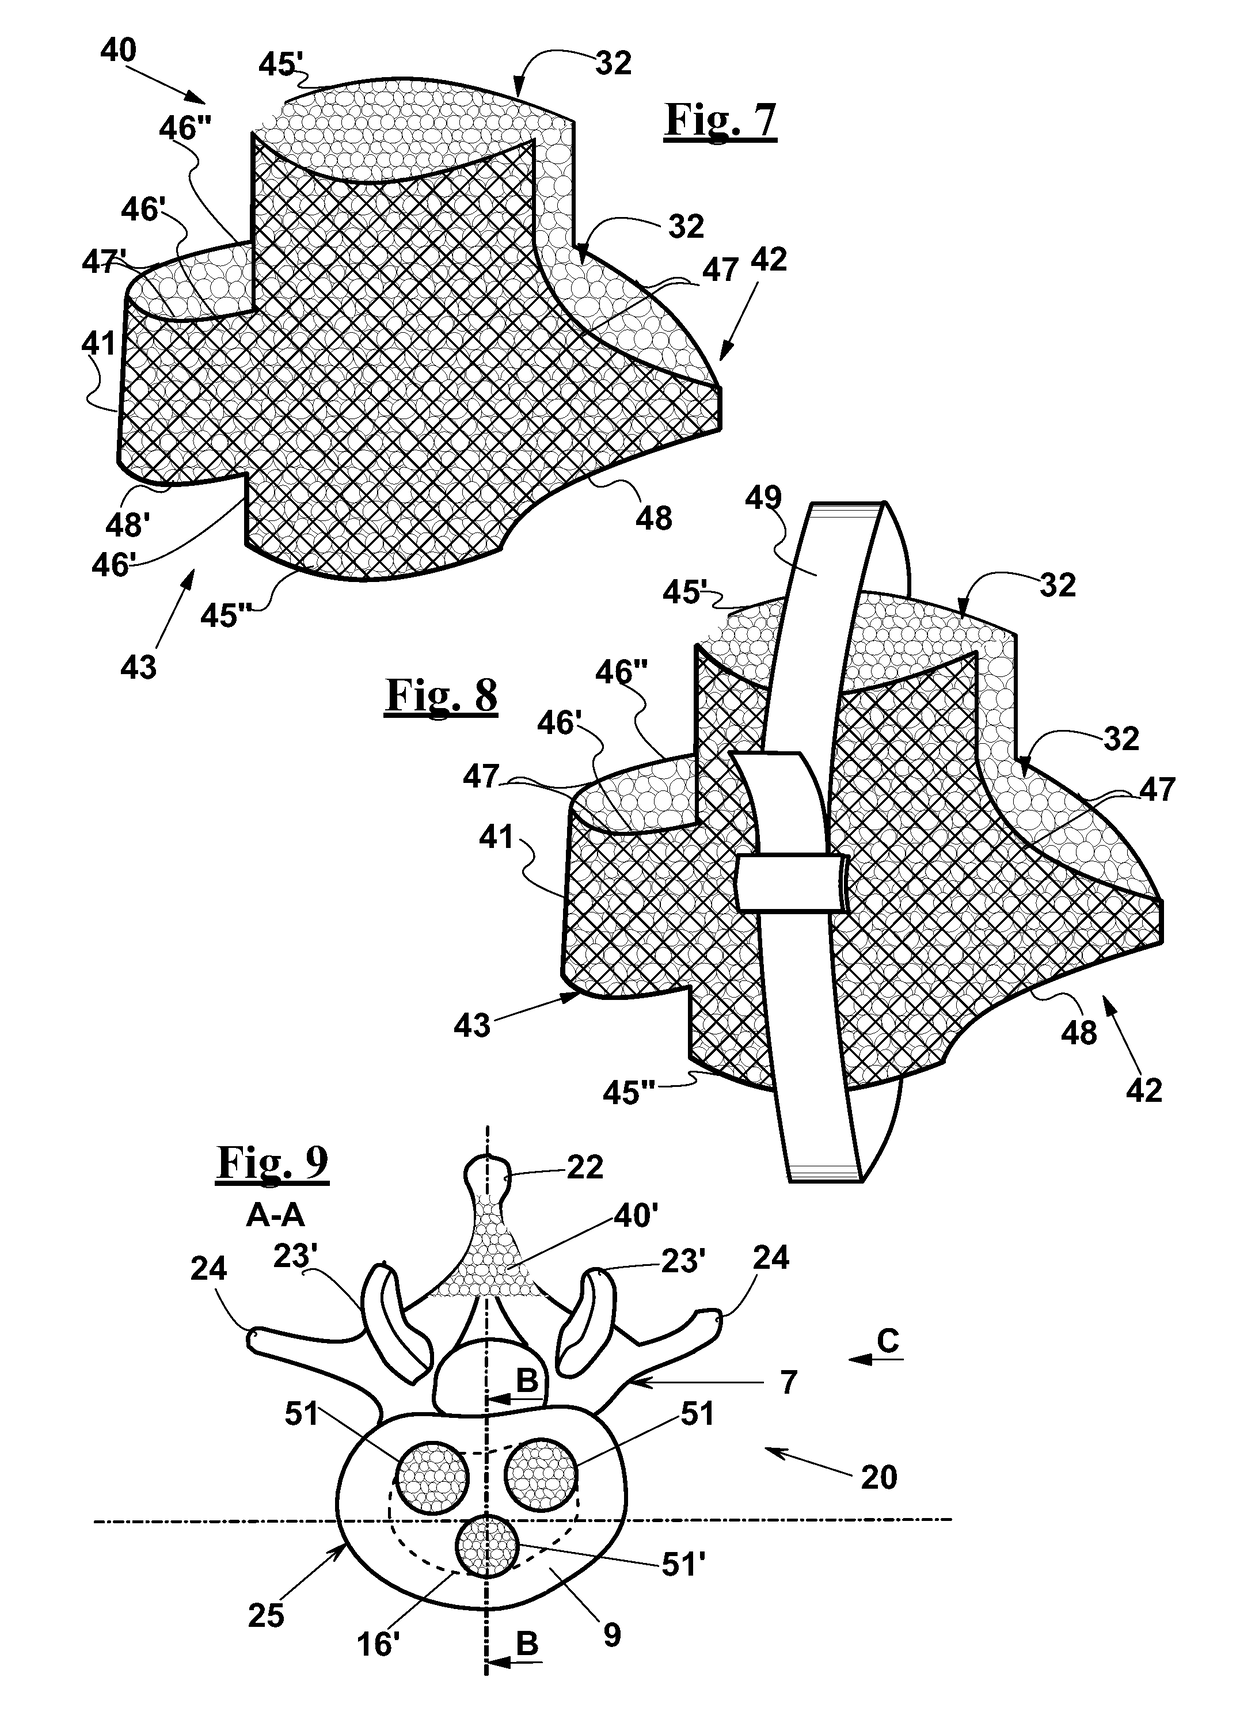 Vertebral fusion device and system